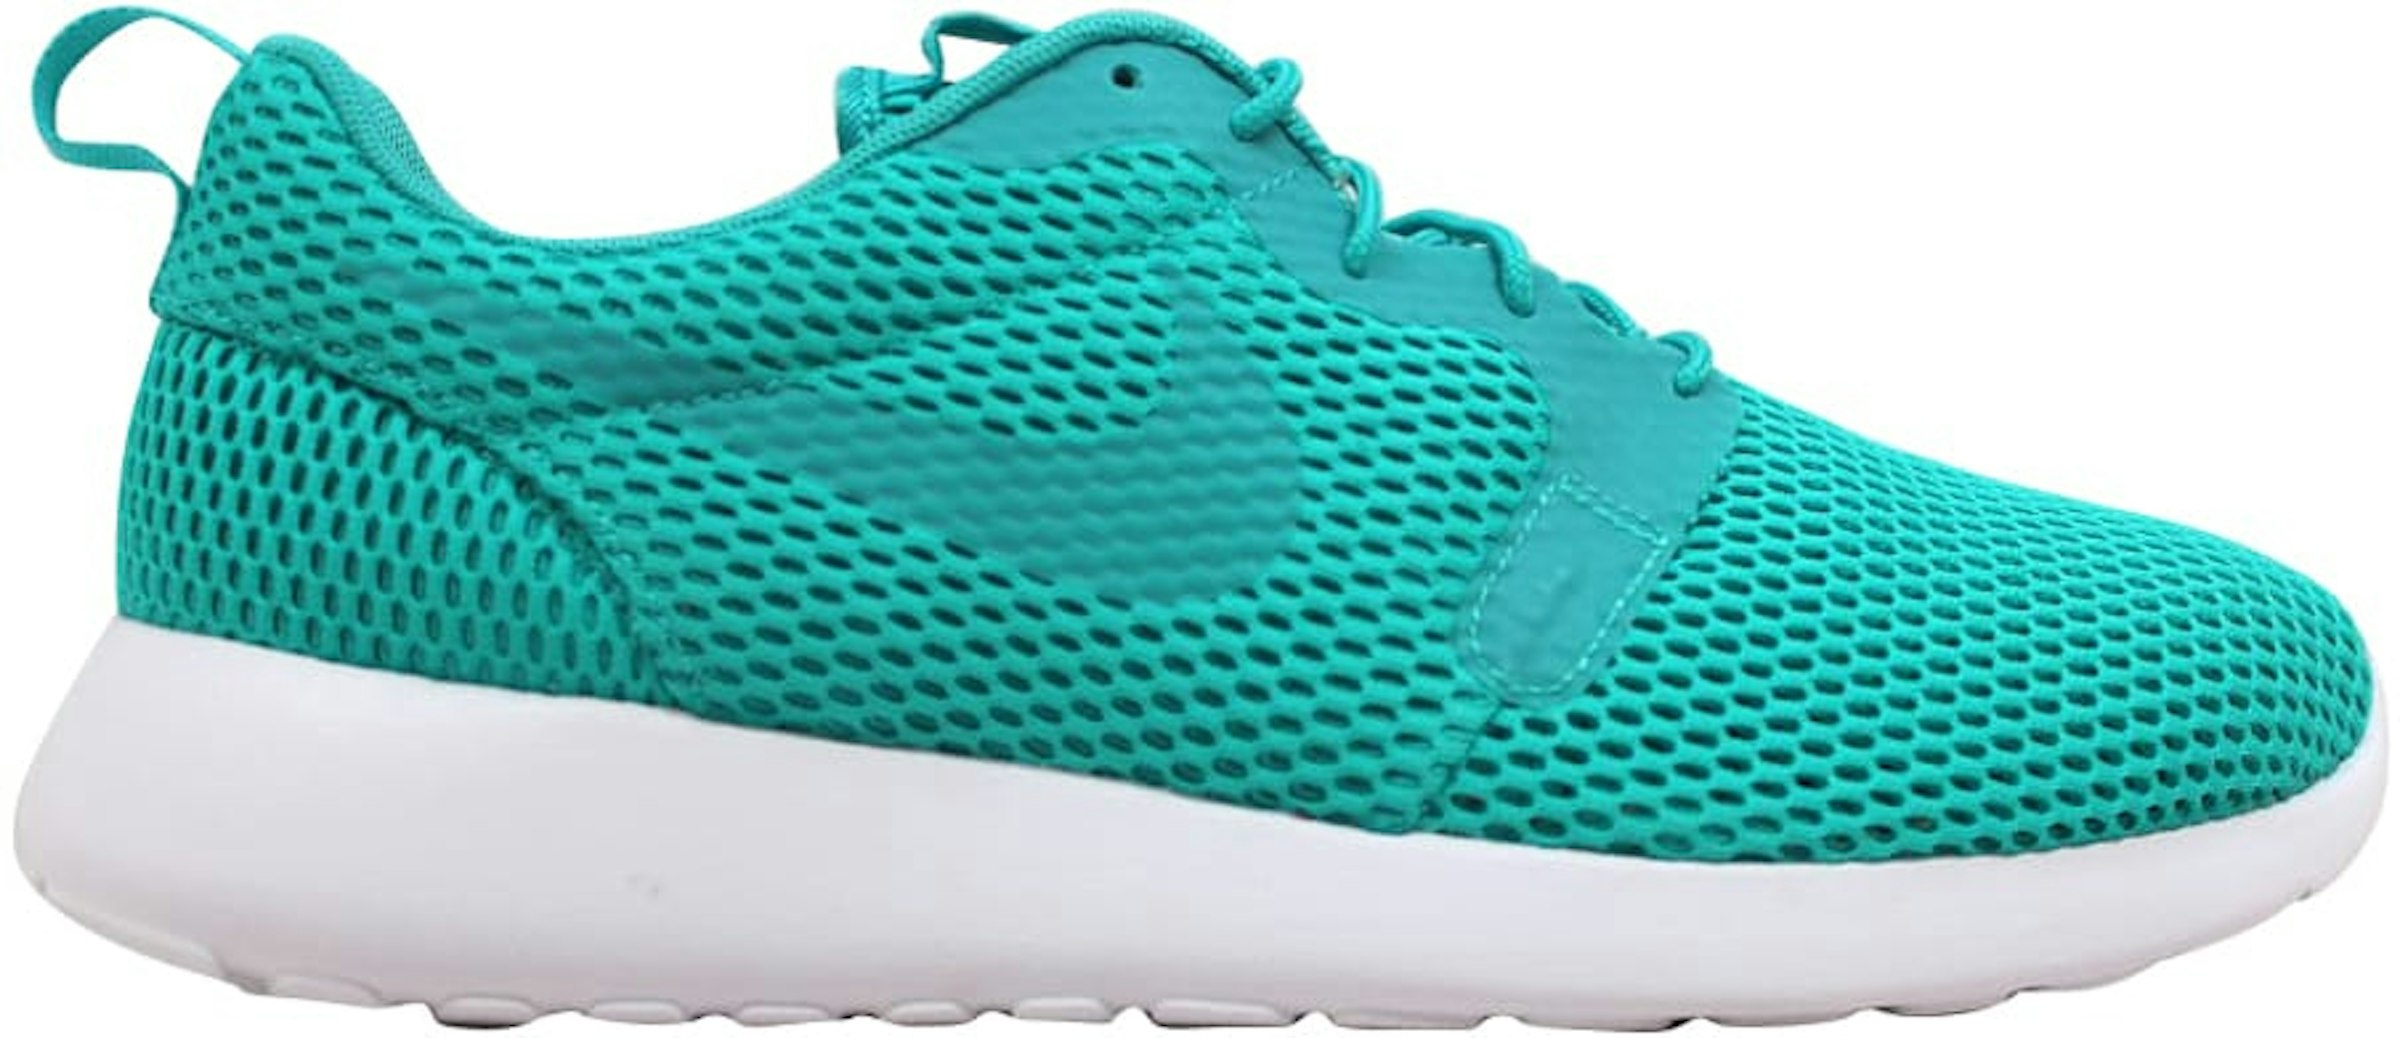 tragedia Prisionero parcialidad Nike Roshe One Hyp Br Clear Jade/Clear Jade-White Men's - 833125-300 - US